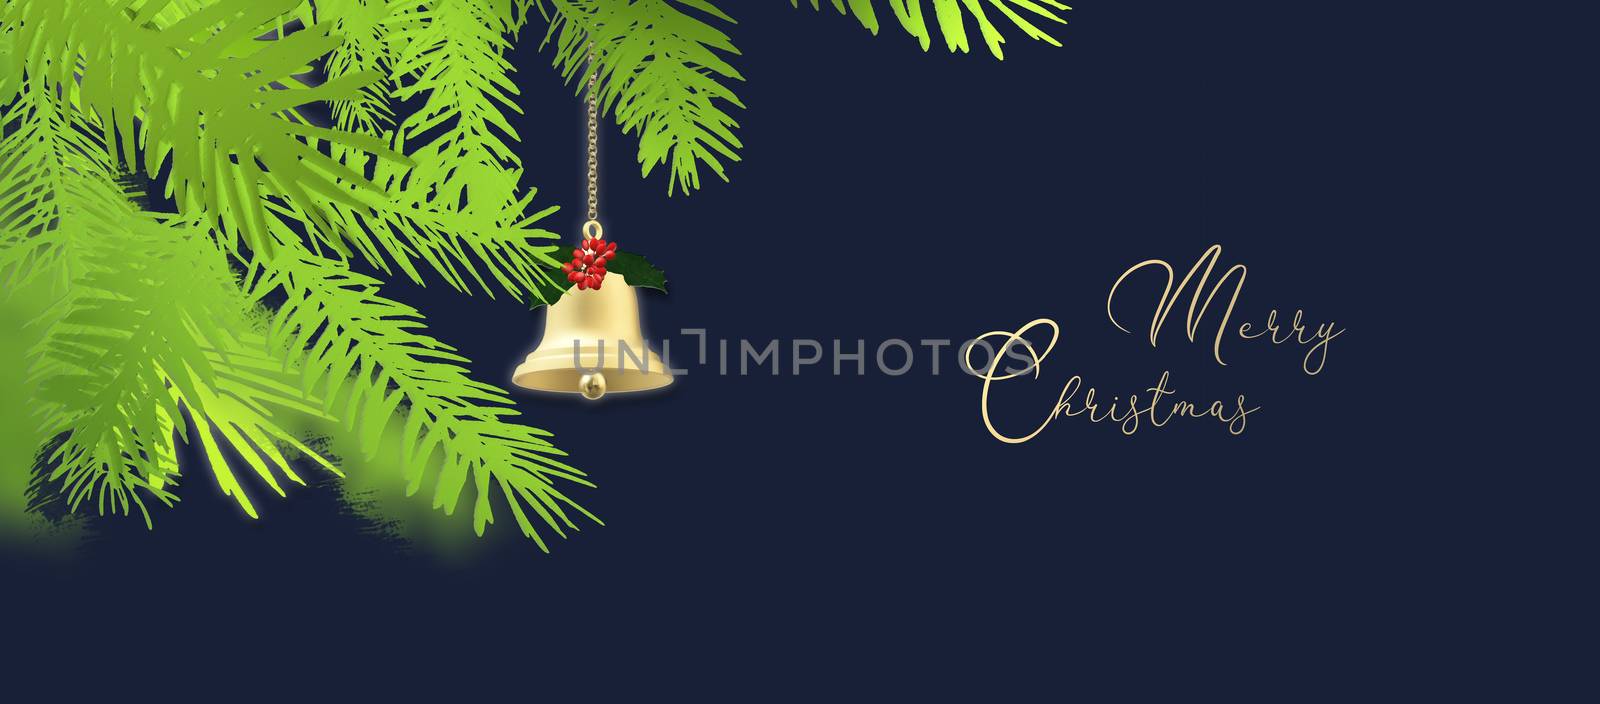 Merry Christmas background. Christmas fir, hanging gold Xmas bell over dark blue background. Gold text Merry Christmas. 3D illustration